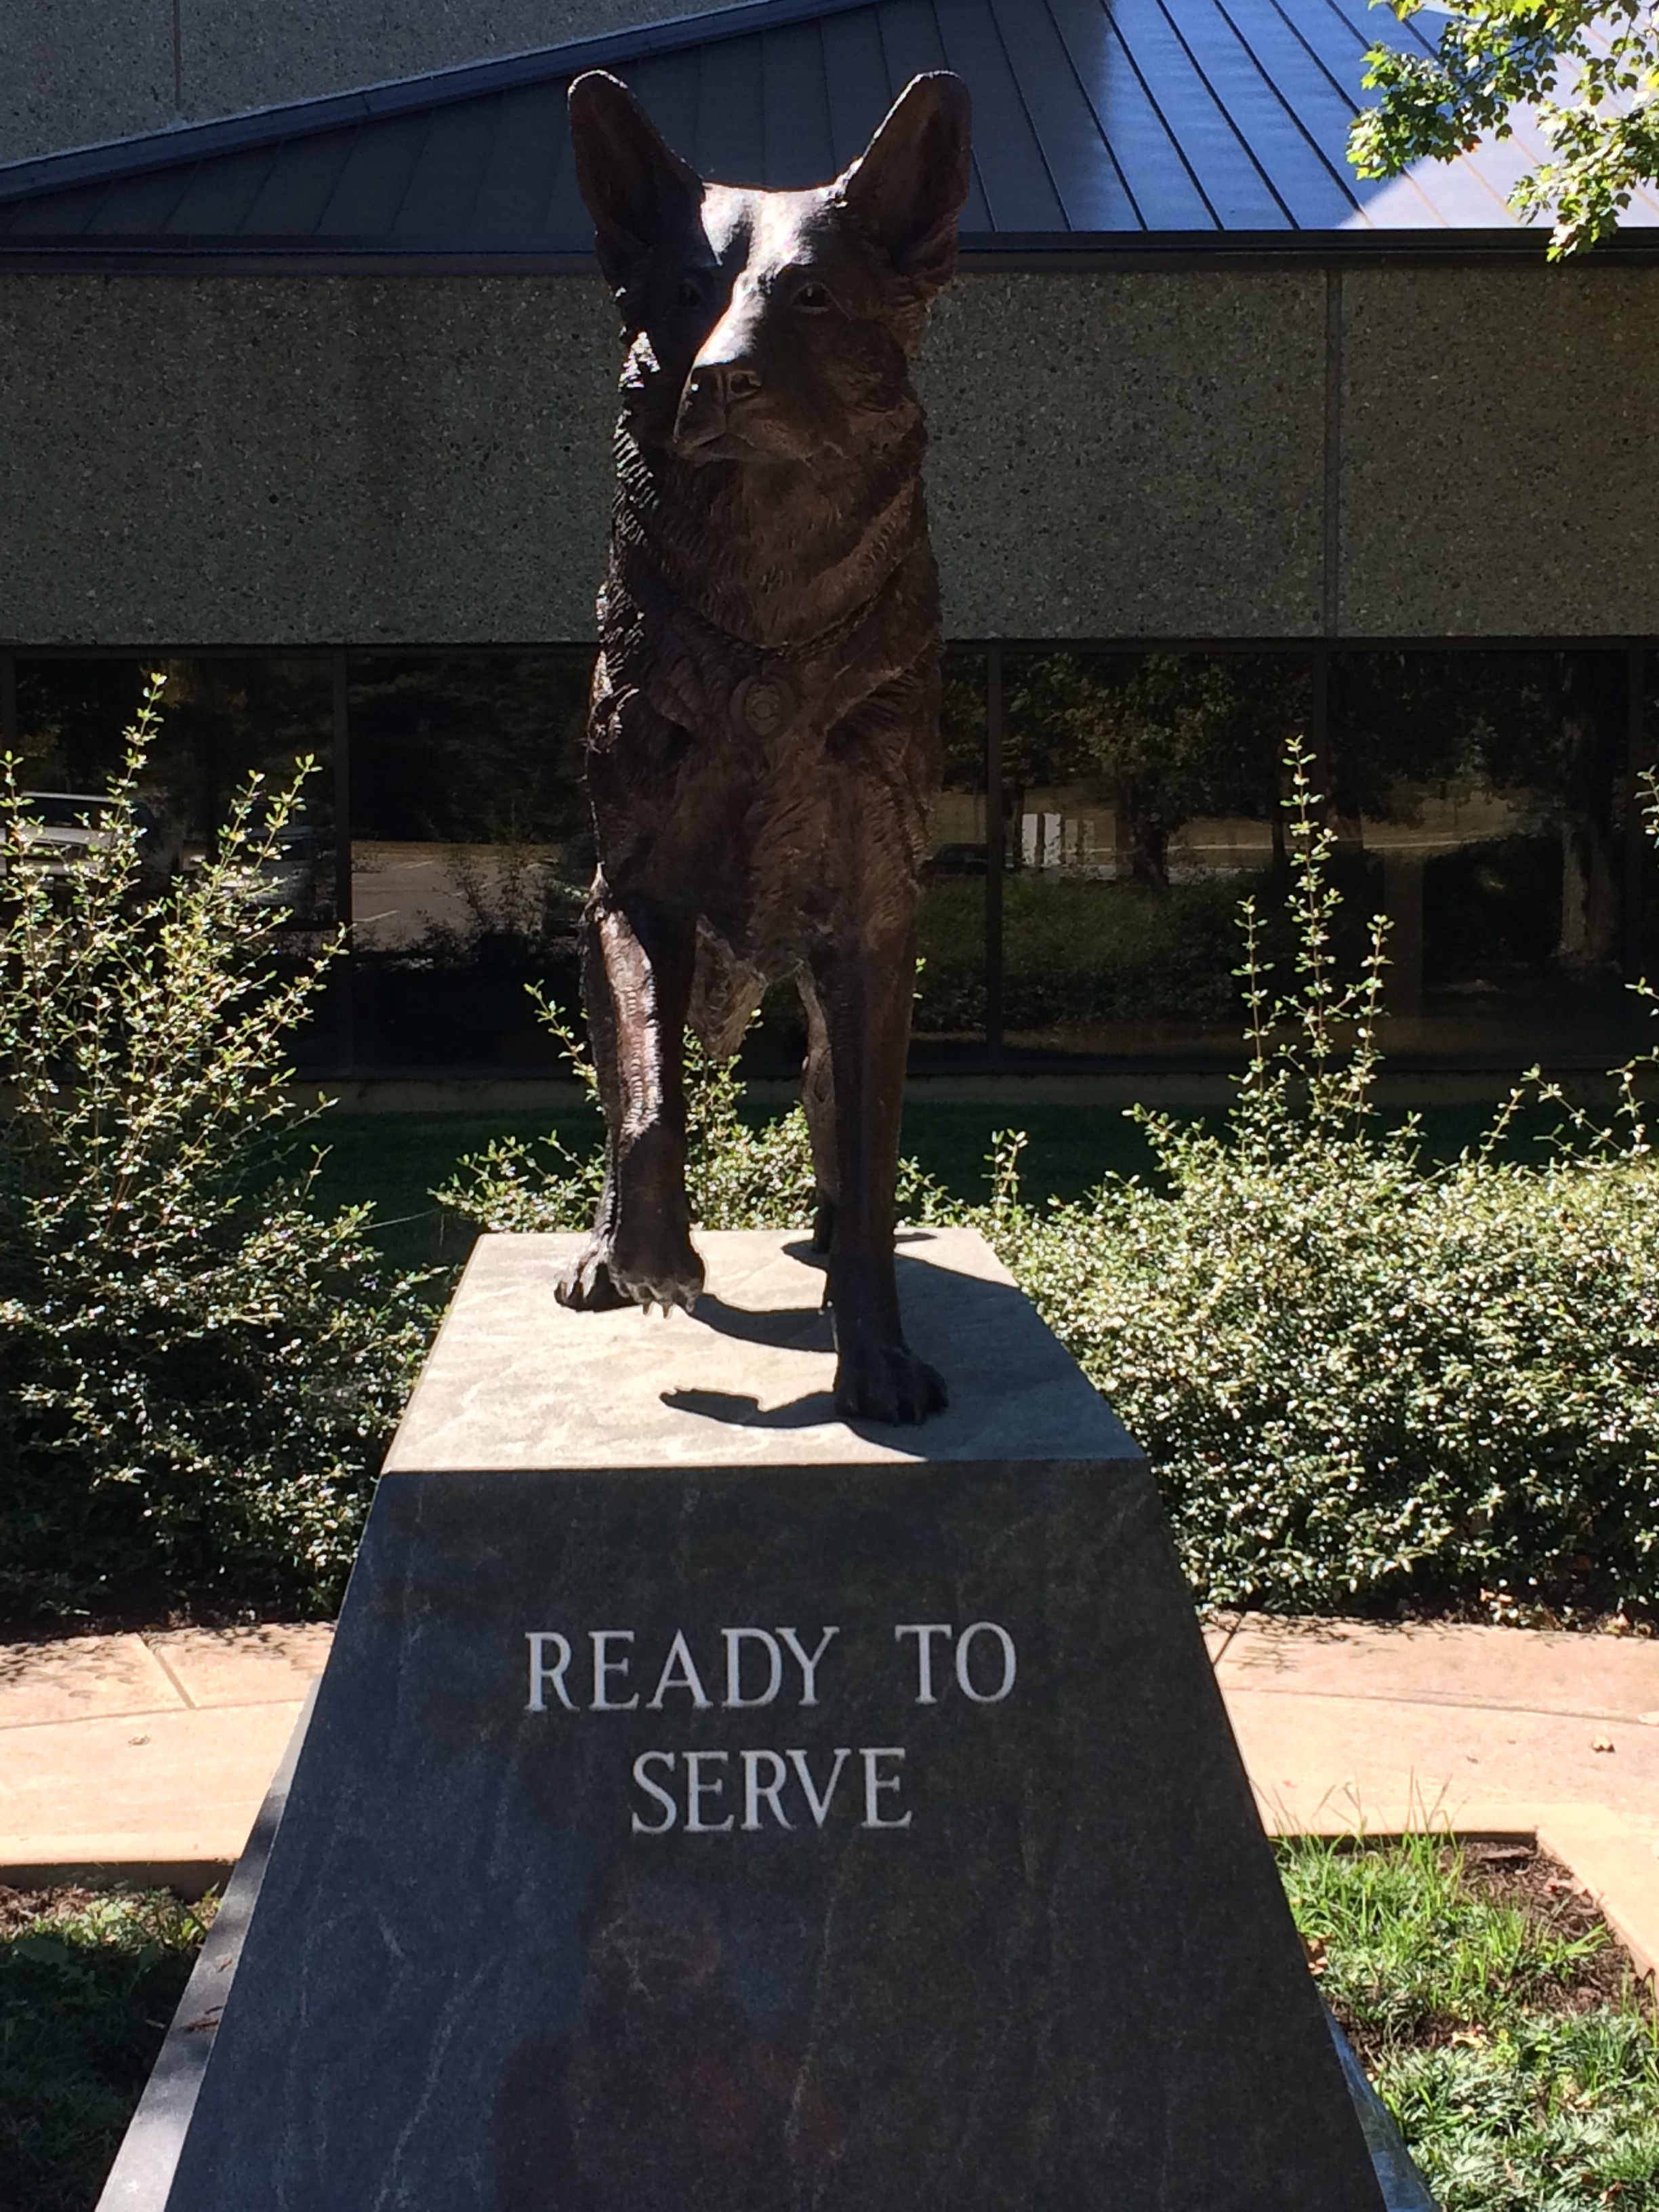 Police dog memorial statue in front of the Veterinary Teaching Hospital at the Virginia-Maryland College of Veterinary Medicine. Tina Rowland Kimmett visited there in 2015 to learn about canine lumbosacral muscle anatomy from Dr. Larry Freeman.